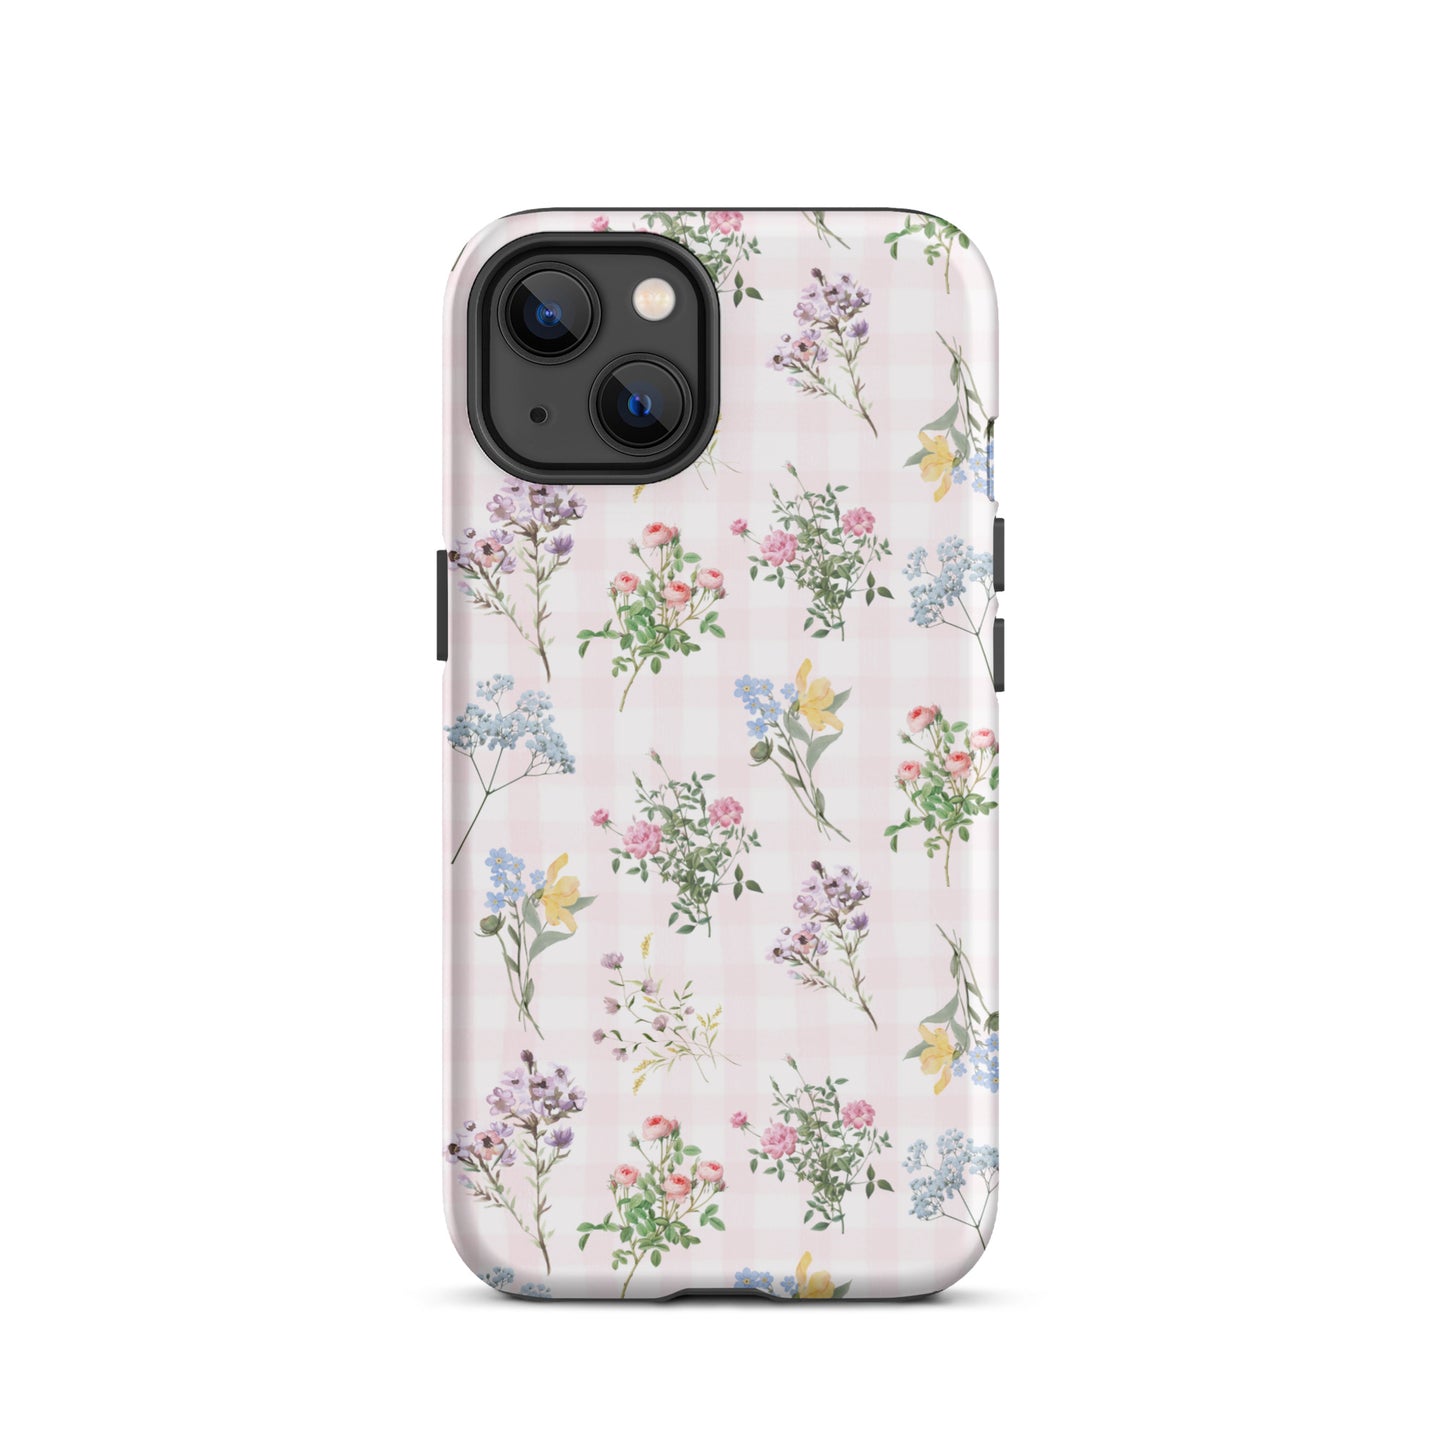 Spring Floral iPhone Case